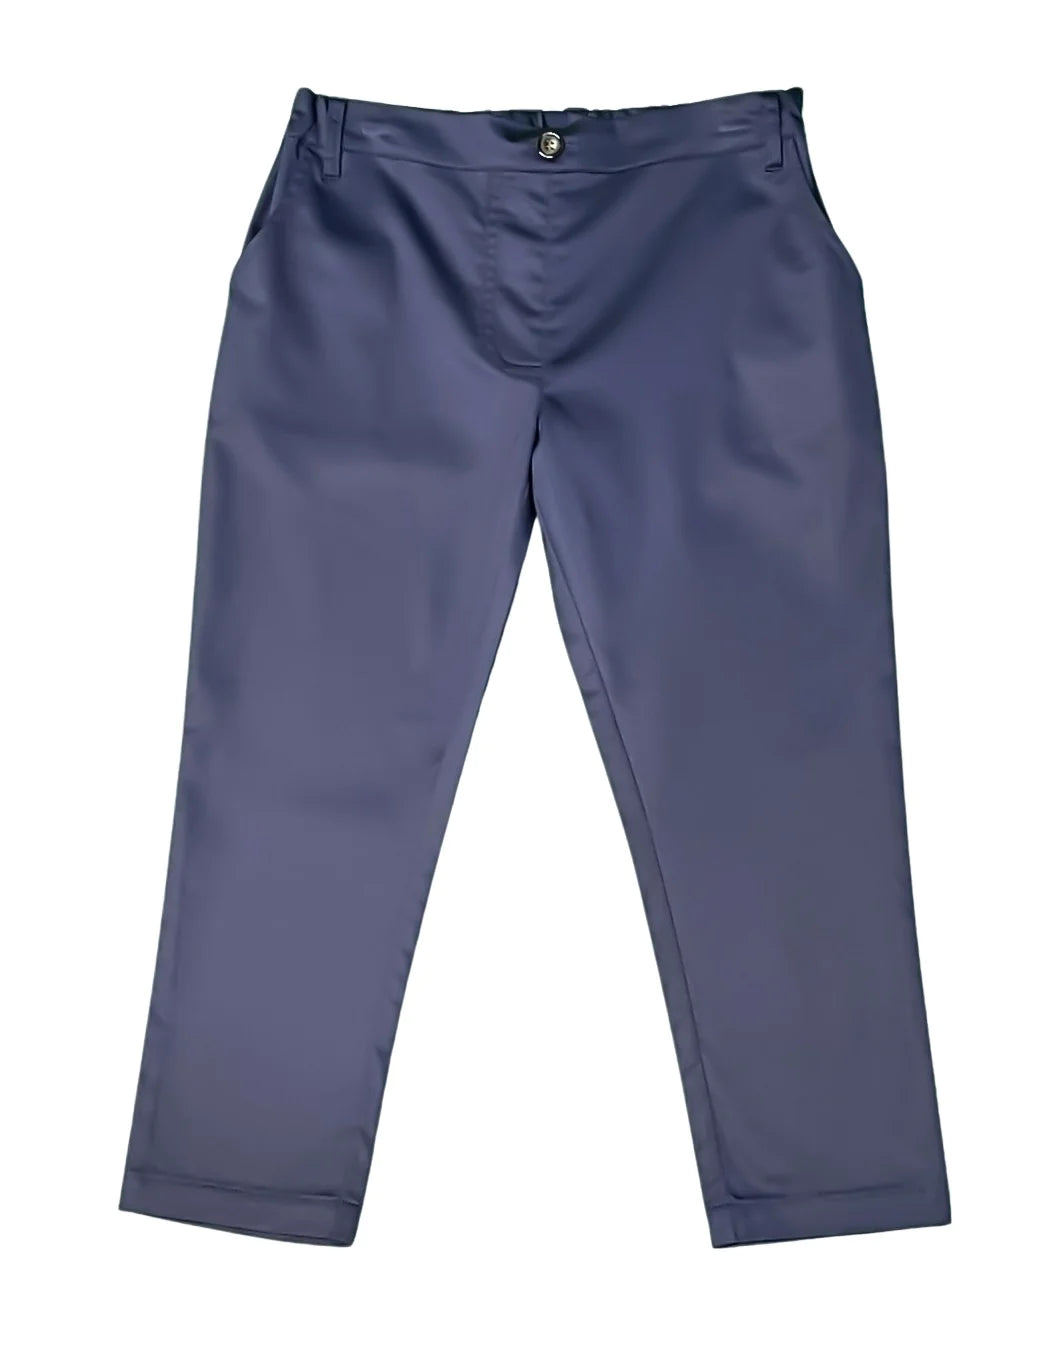 Ponce Pants in Navy